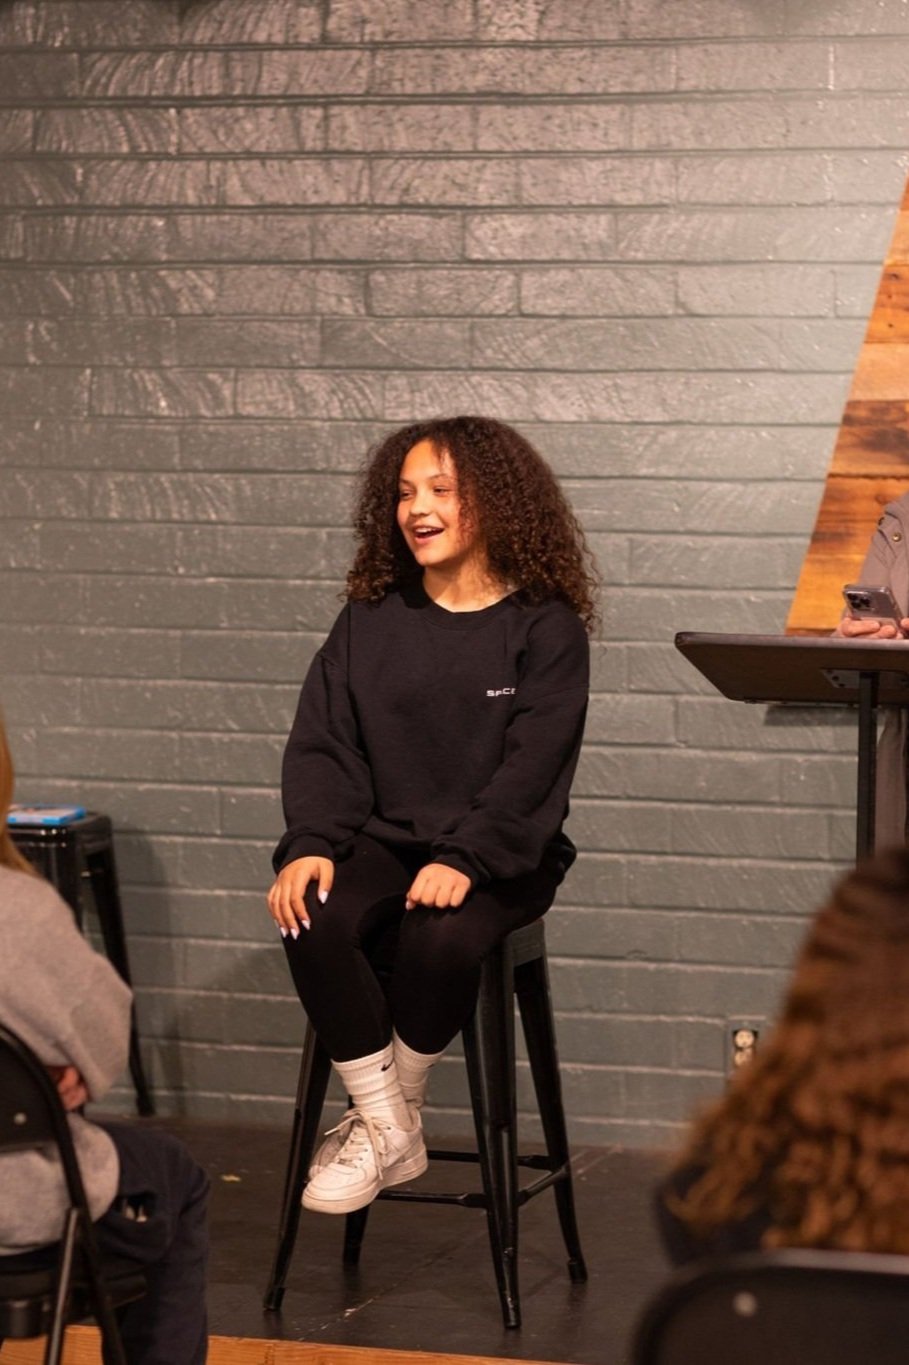  A young girl seated on stool with Youth ministry group 